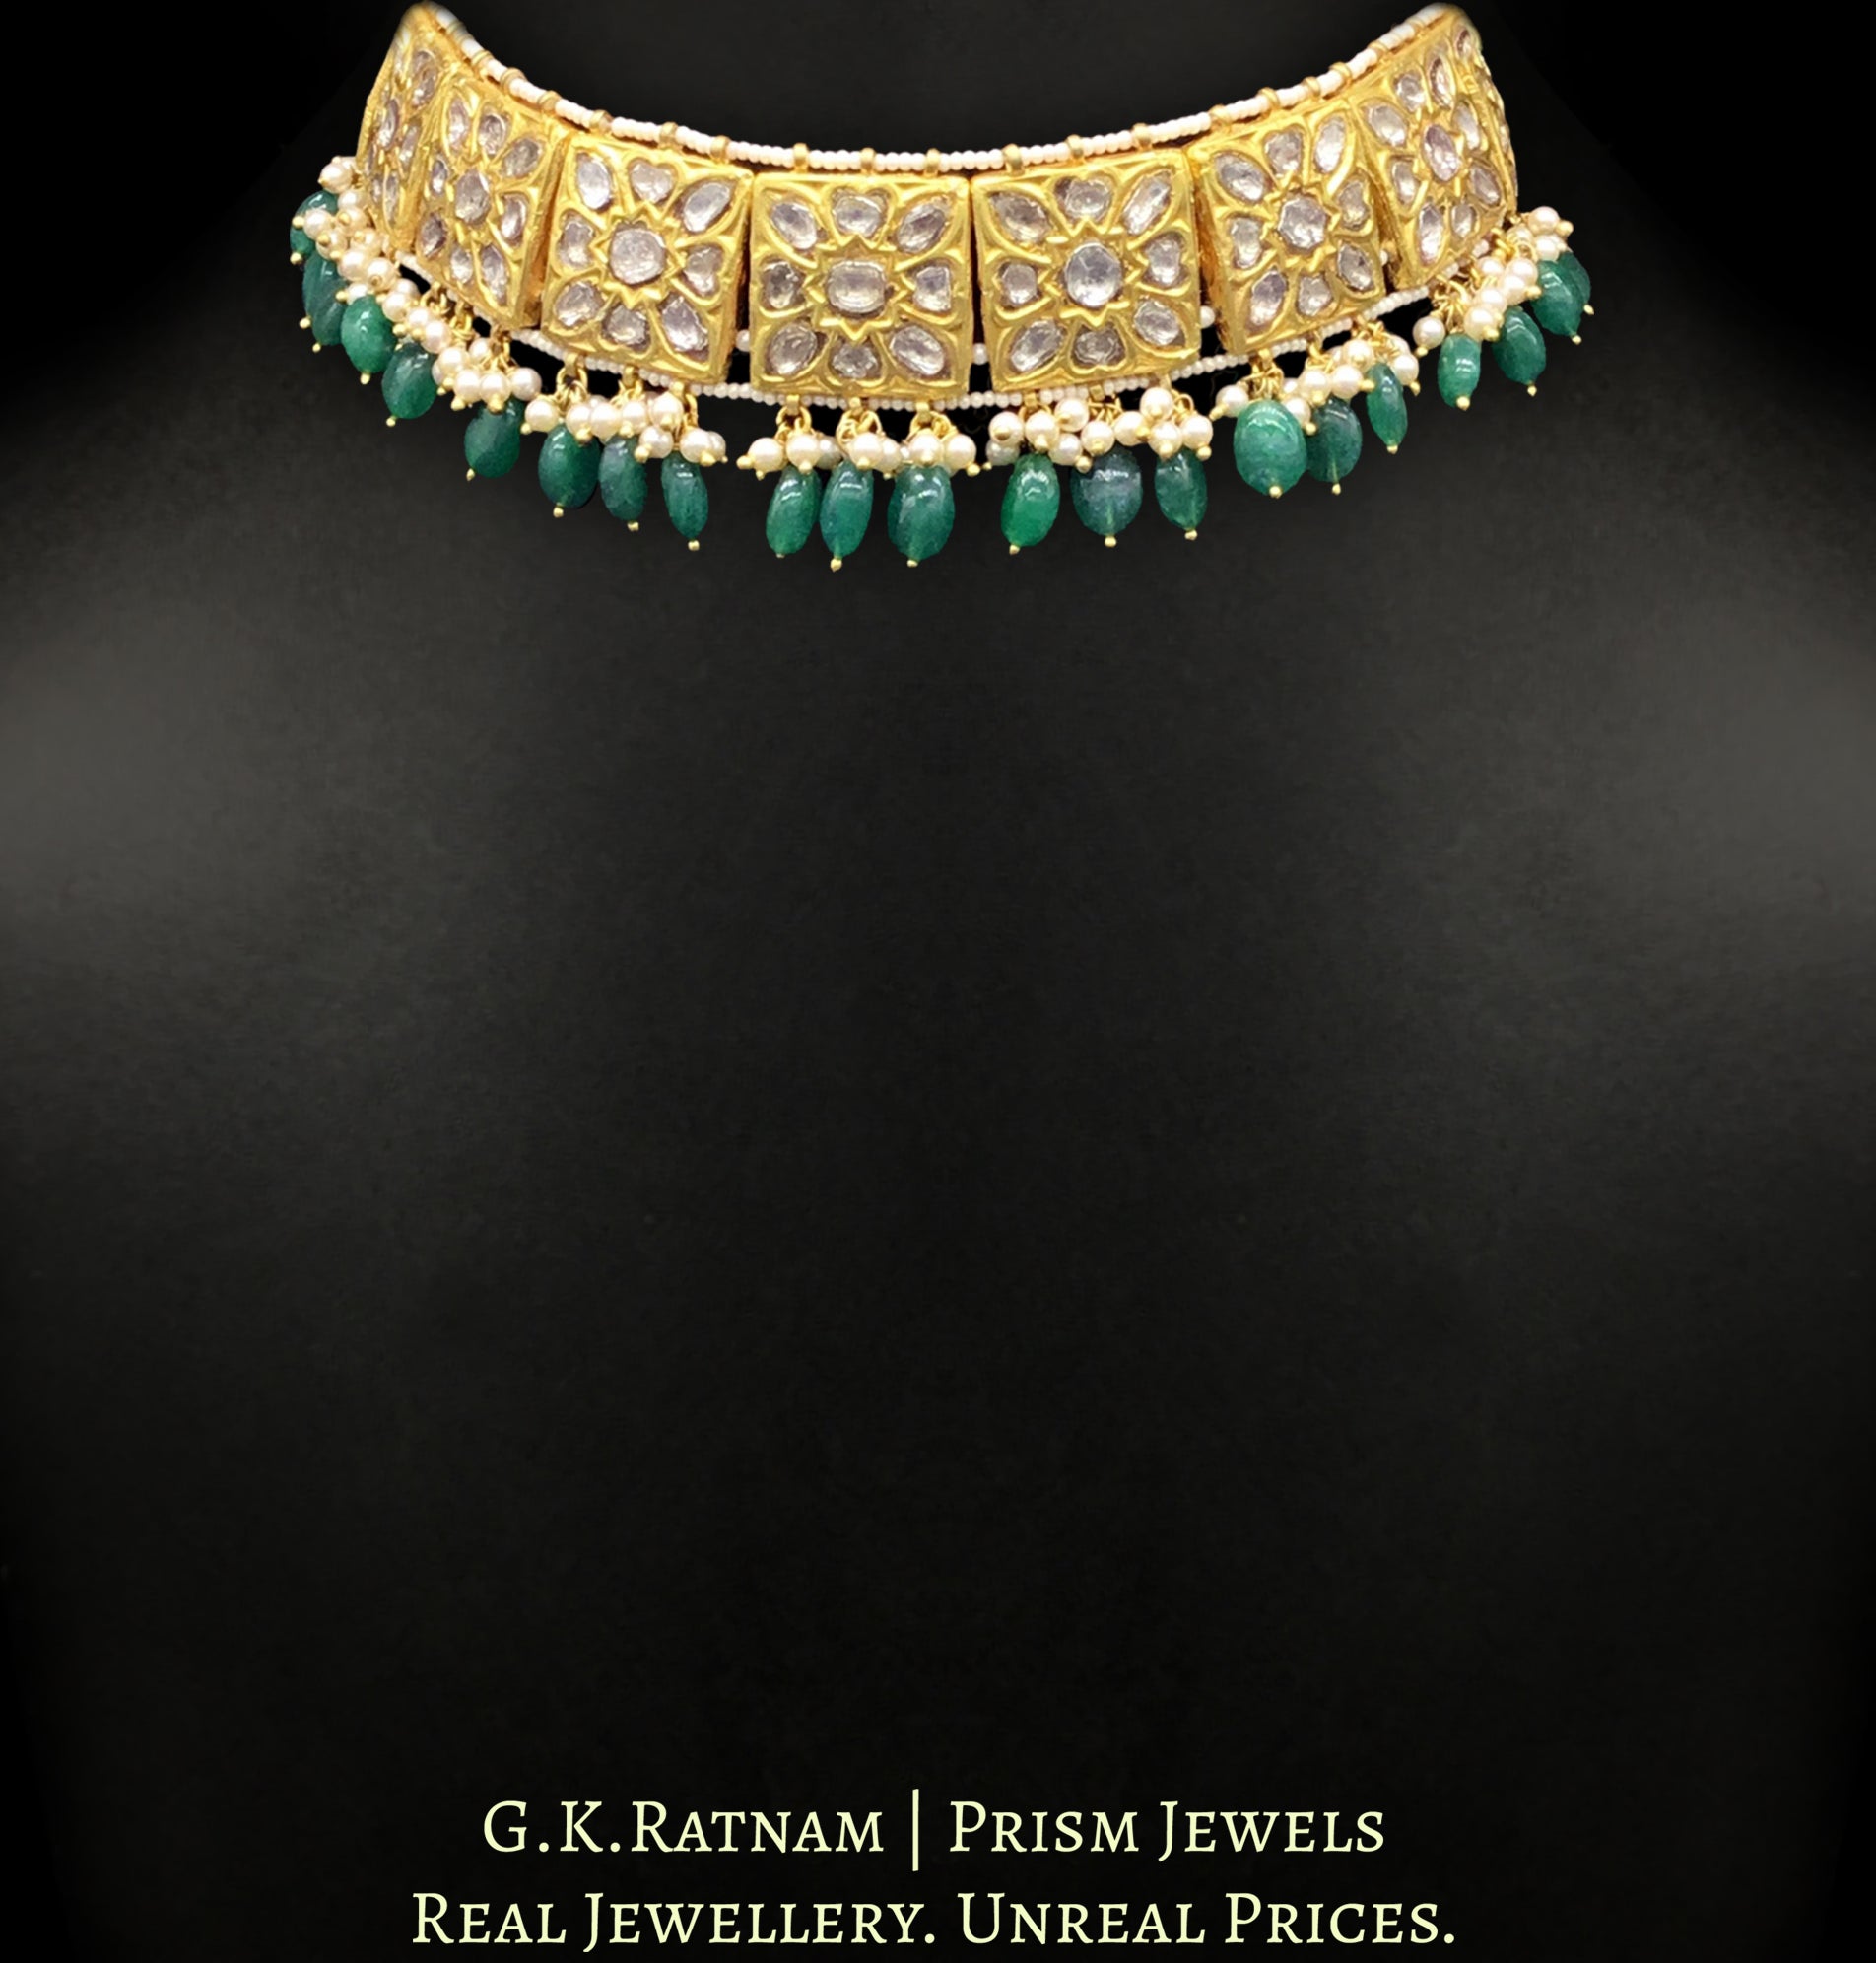 23k Gold and Diamond Polki square-pieces Choker Necklace Set with emerald-grade beryls